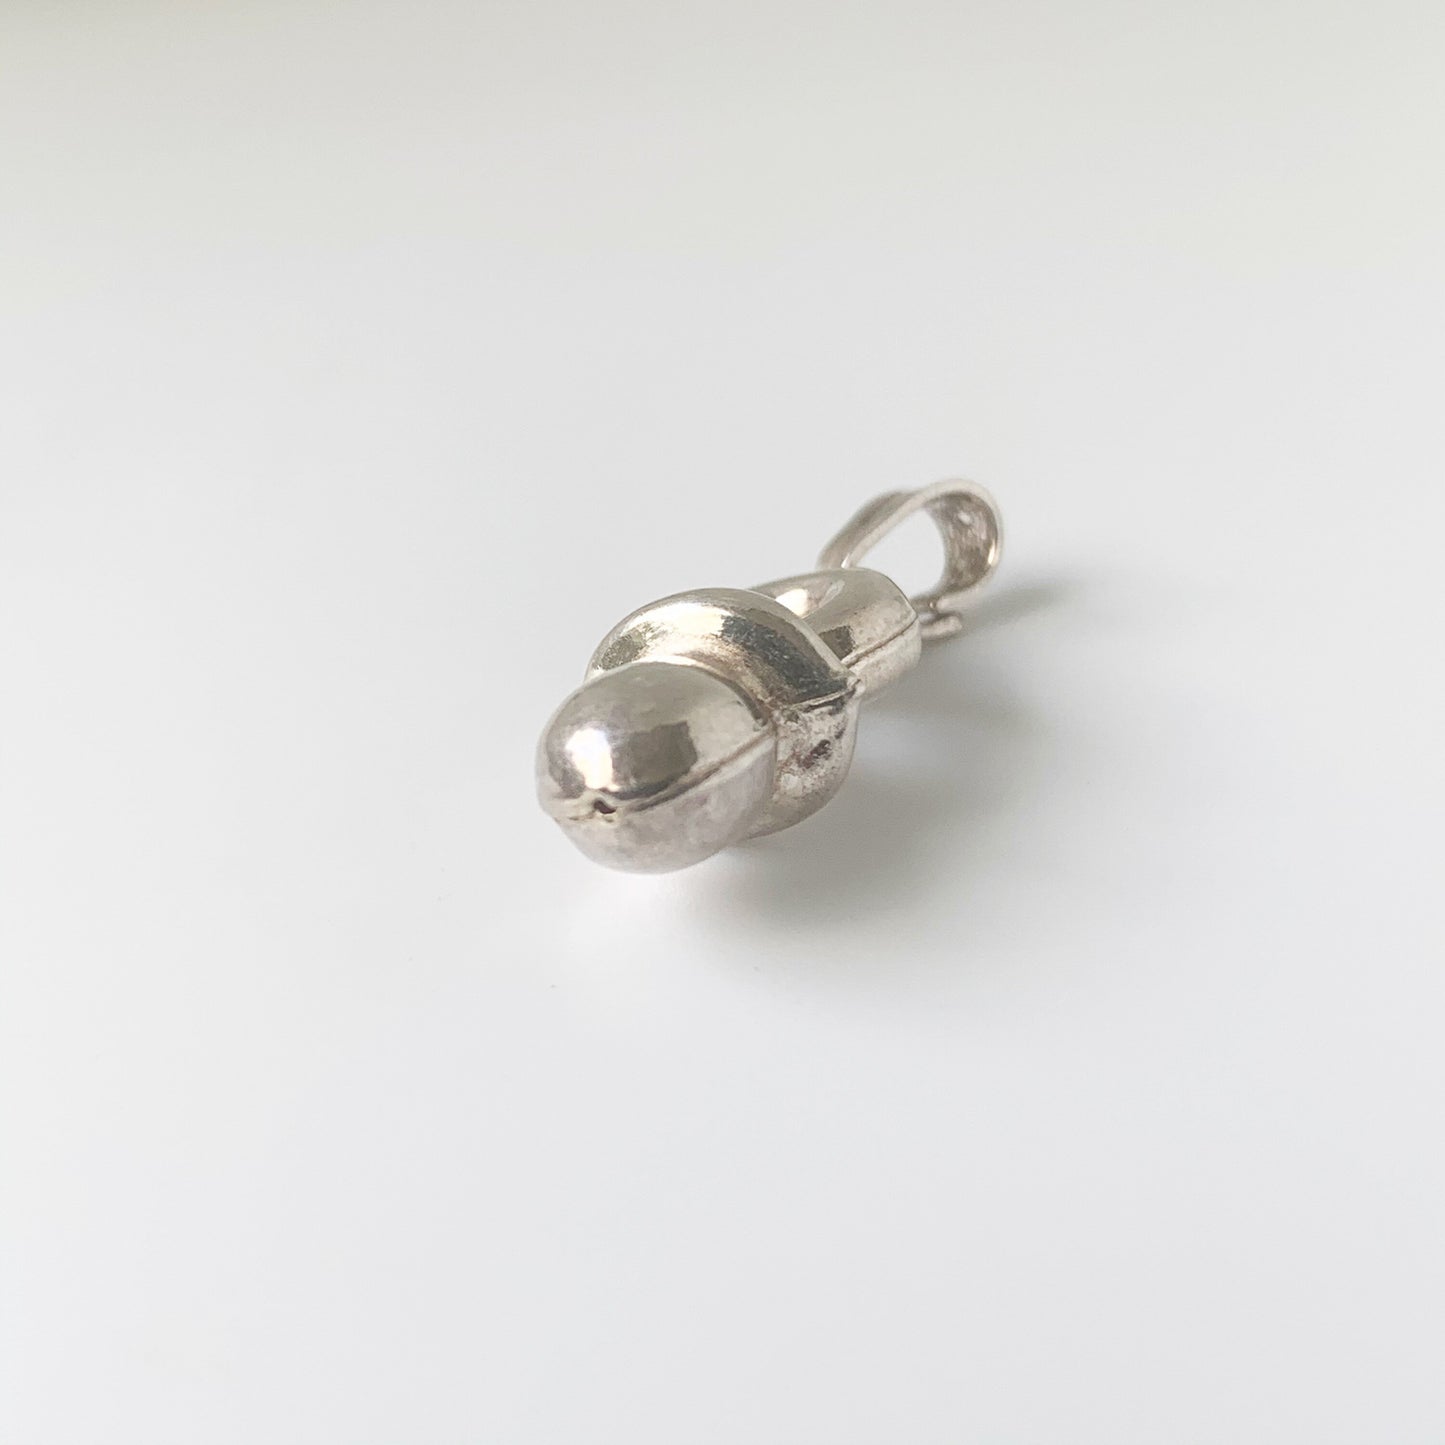 Vintage Puffy Baby Pacifier Charm | Silver Pacifier Charm | Silver Baby Binkie Charm